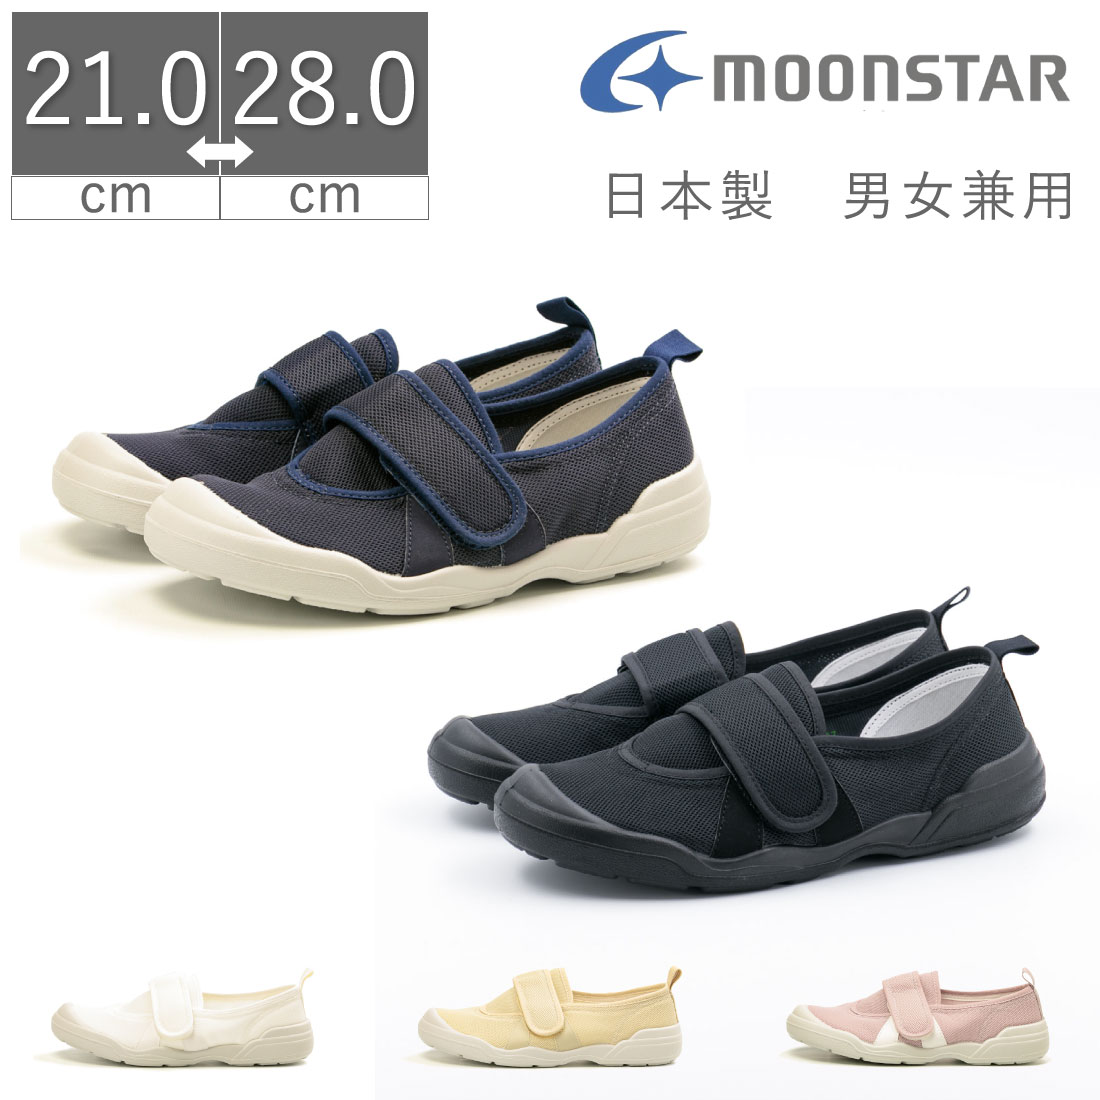  moon Star adult indoor shoes 02 interior put on footwear nursing li is bilimoonstar man and woman use touch fasteners flat shoes indoor shoes anti-bacterial deodorization light weight slipping difficult largish 